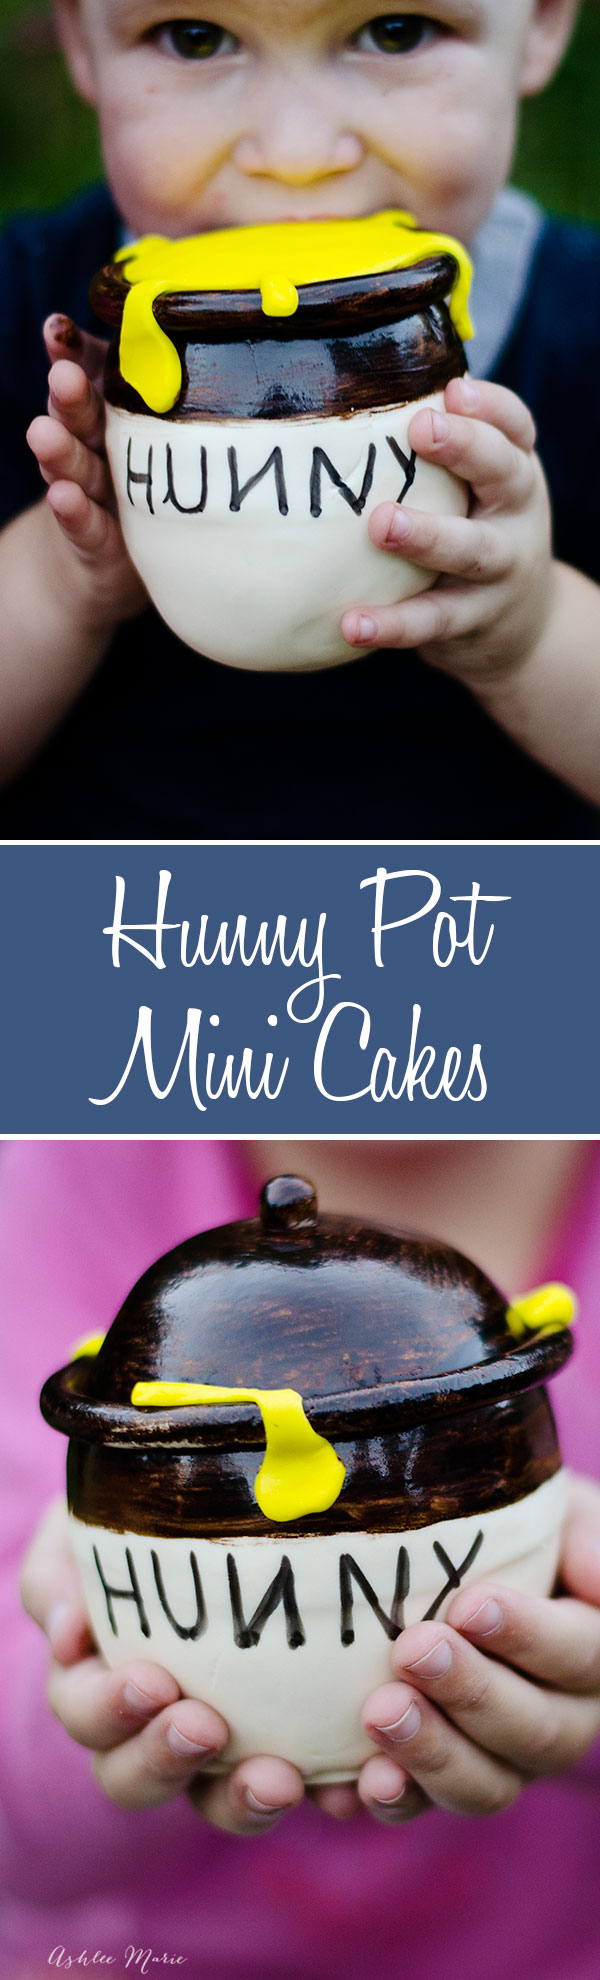 do you love winnie the pooh? we sure do at our house.  Here is a tutorial for creating your own mini honey pot cakes, or as pooh says, hunny pot